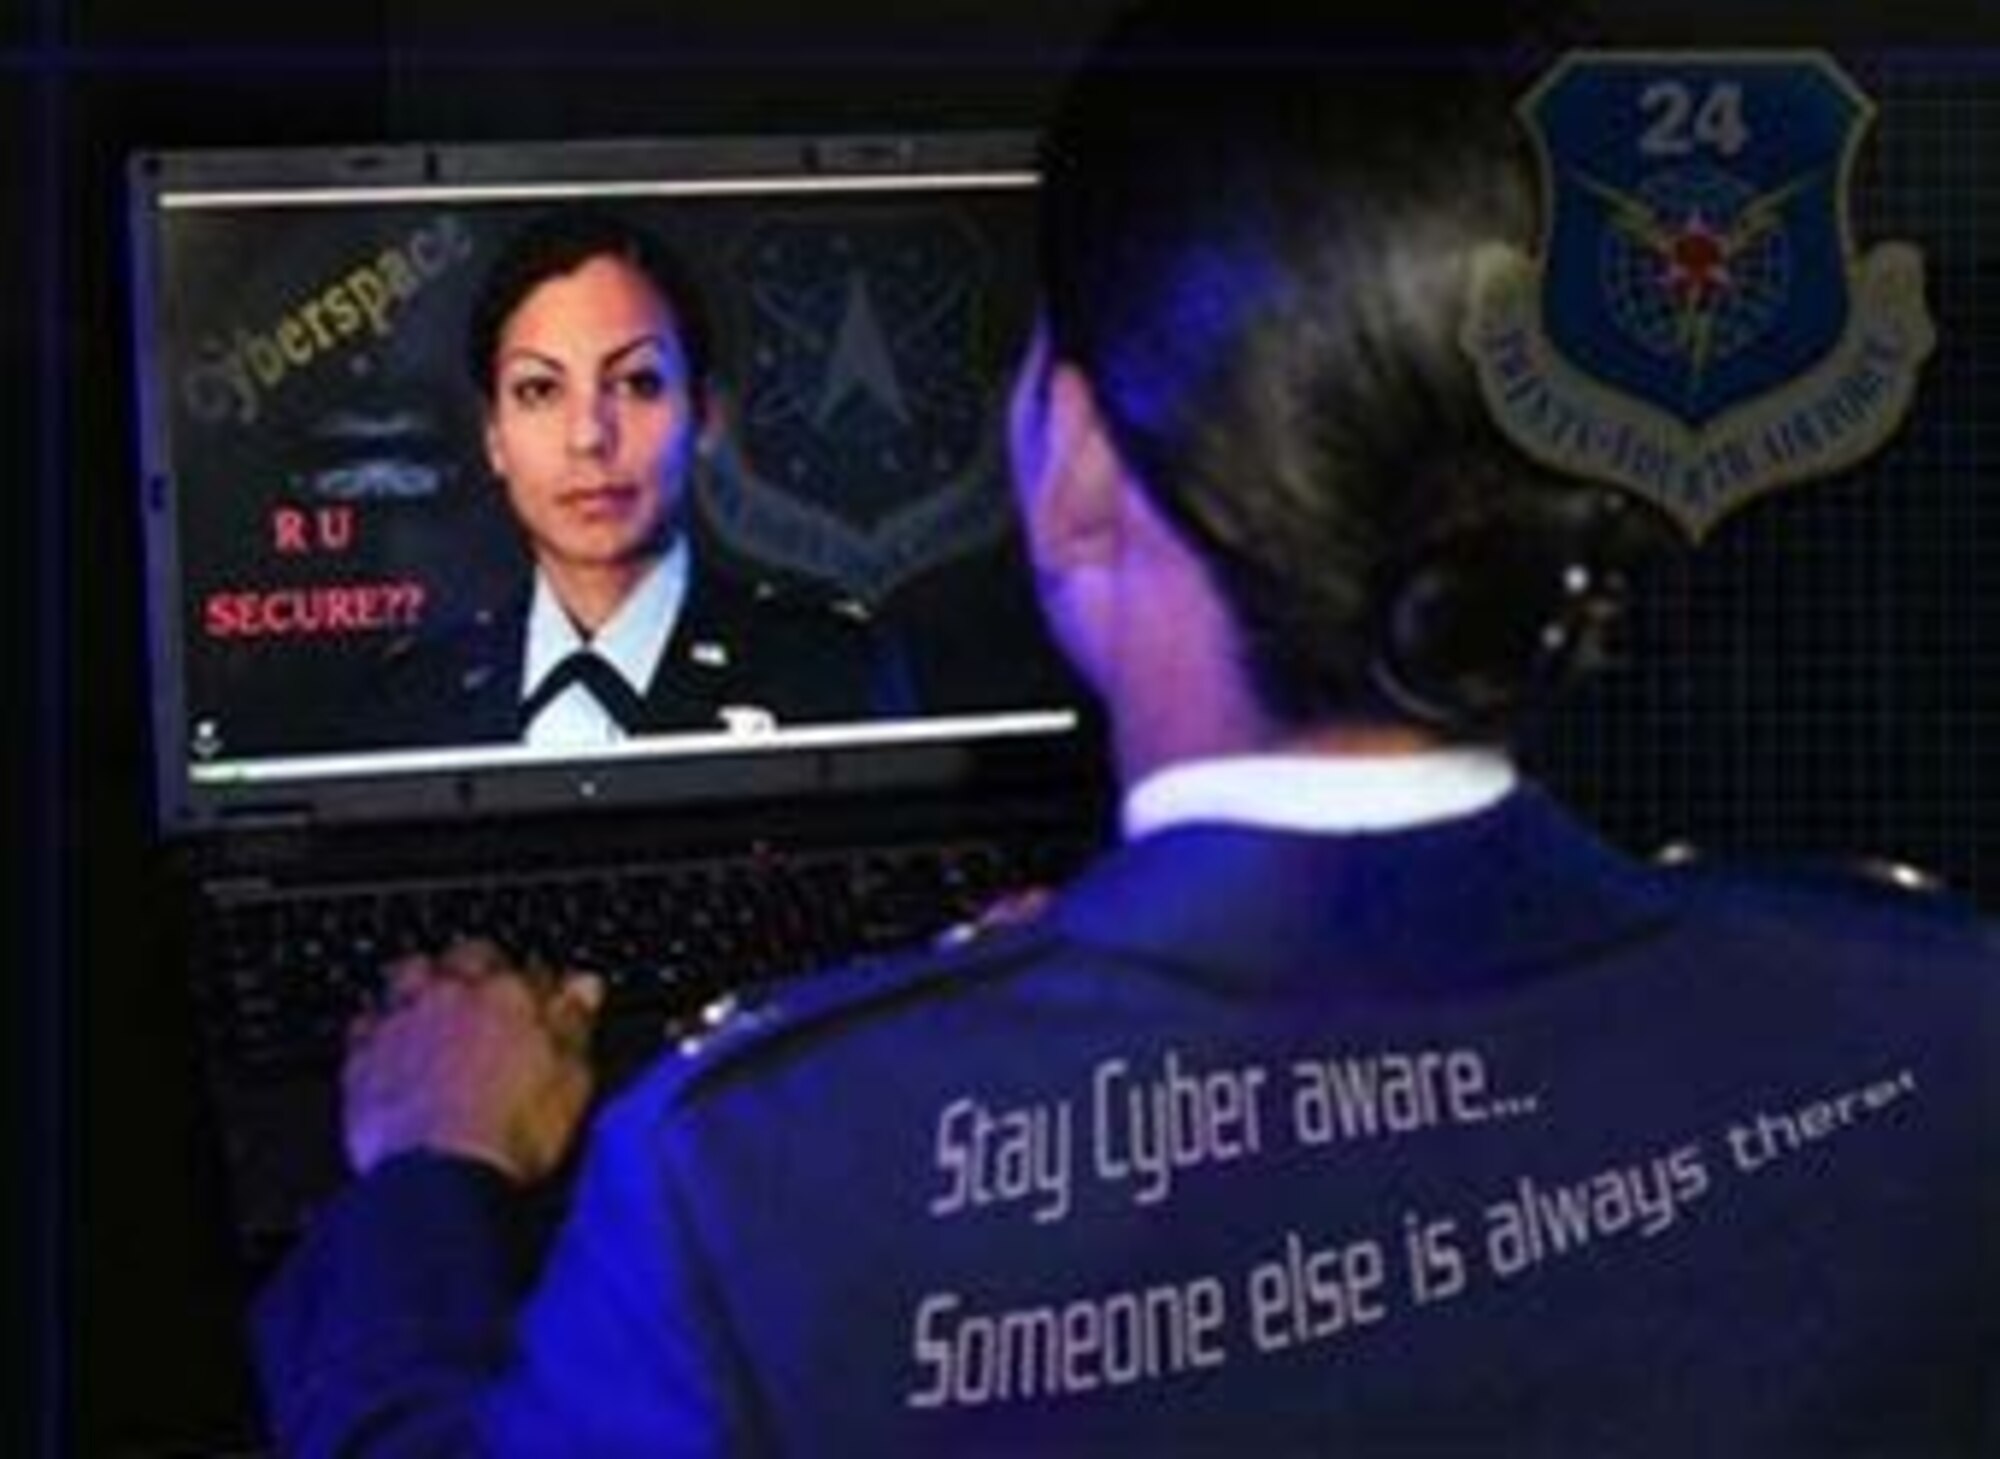 Cyberspace adversaries attack Department of Defense computer networks every day, and Air Force officials have a goal of protecting networks from attack. In August, Air Force Chief of Staff Gen. Norton Schwartz outlined steps the Air Force is taking to centralize this mission. (U.S. Air Force photo illustration)